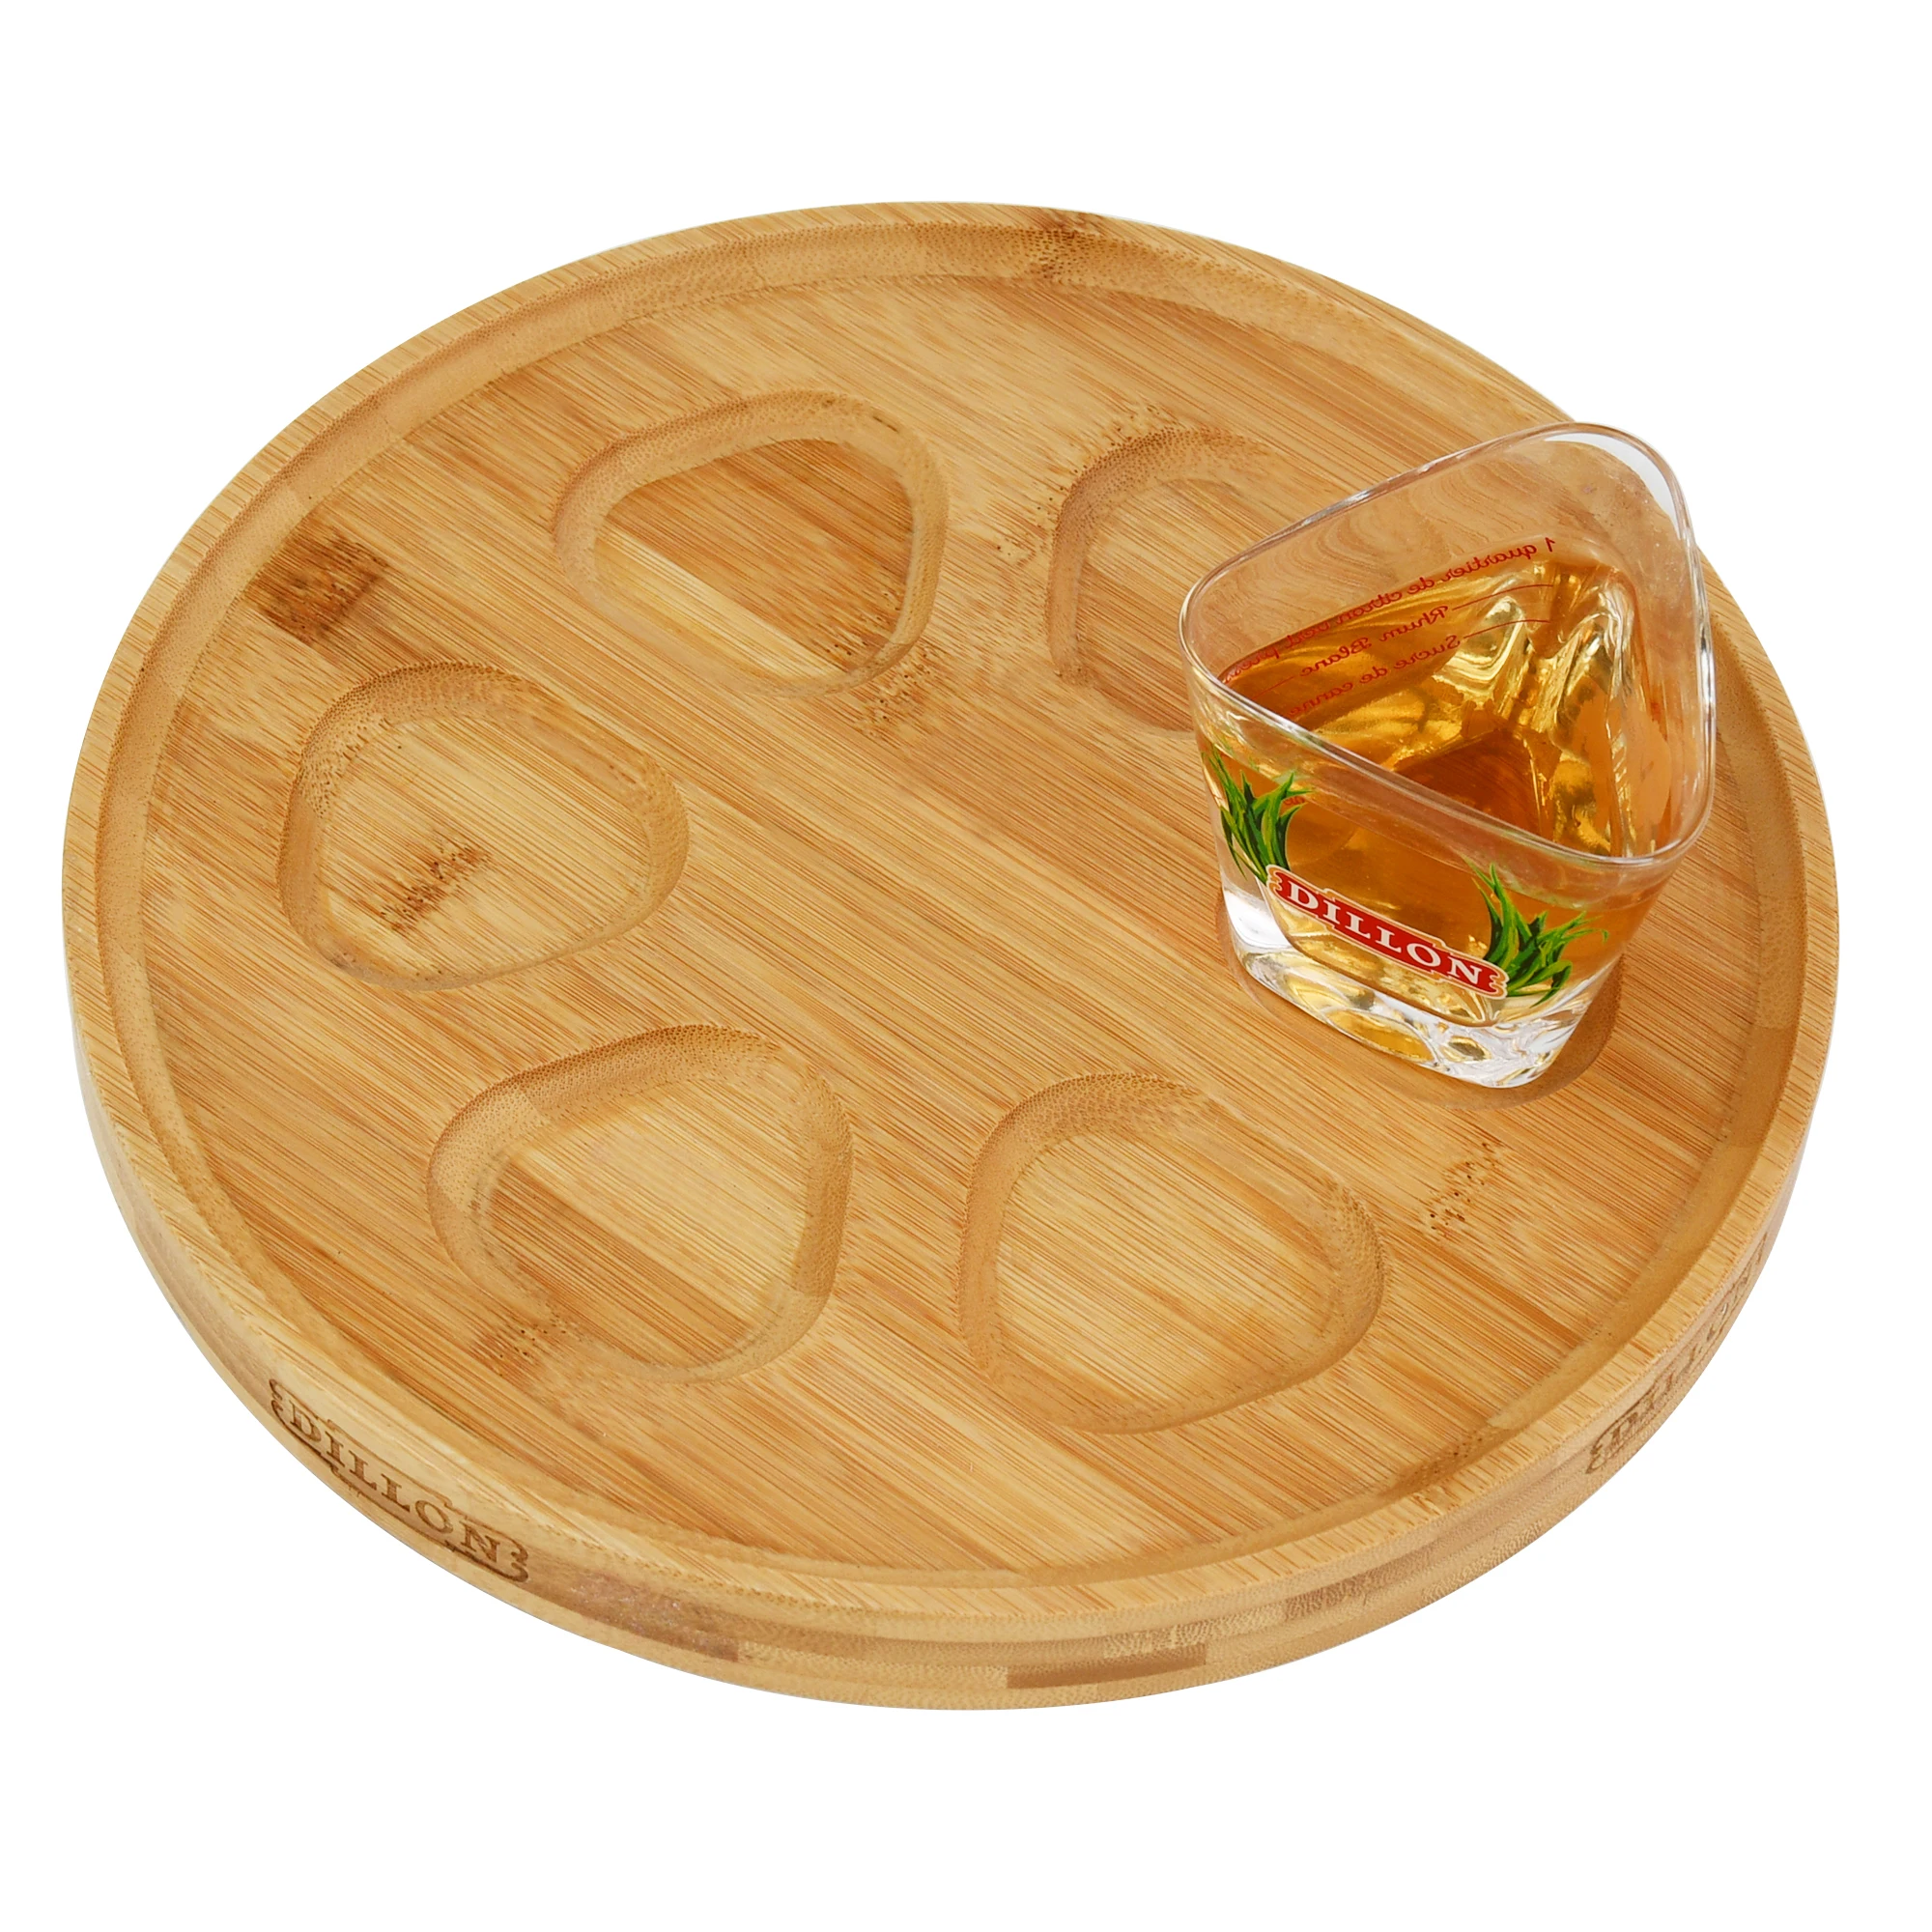 60ml 2oz Round Bamboo Wood Shot Glass Serving Tray Drinks Cup for Family Gath, Ski Shape Shot Glass Holder